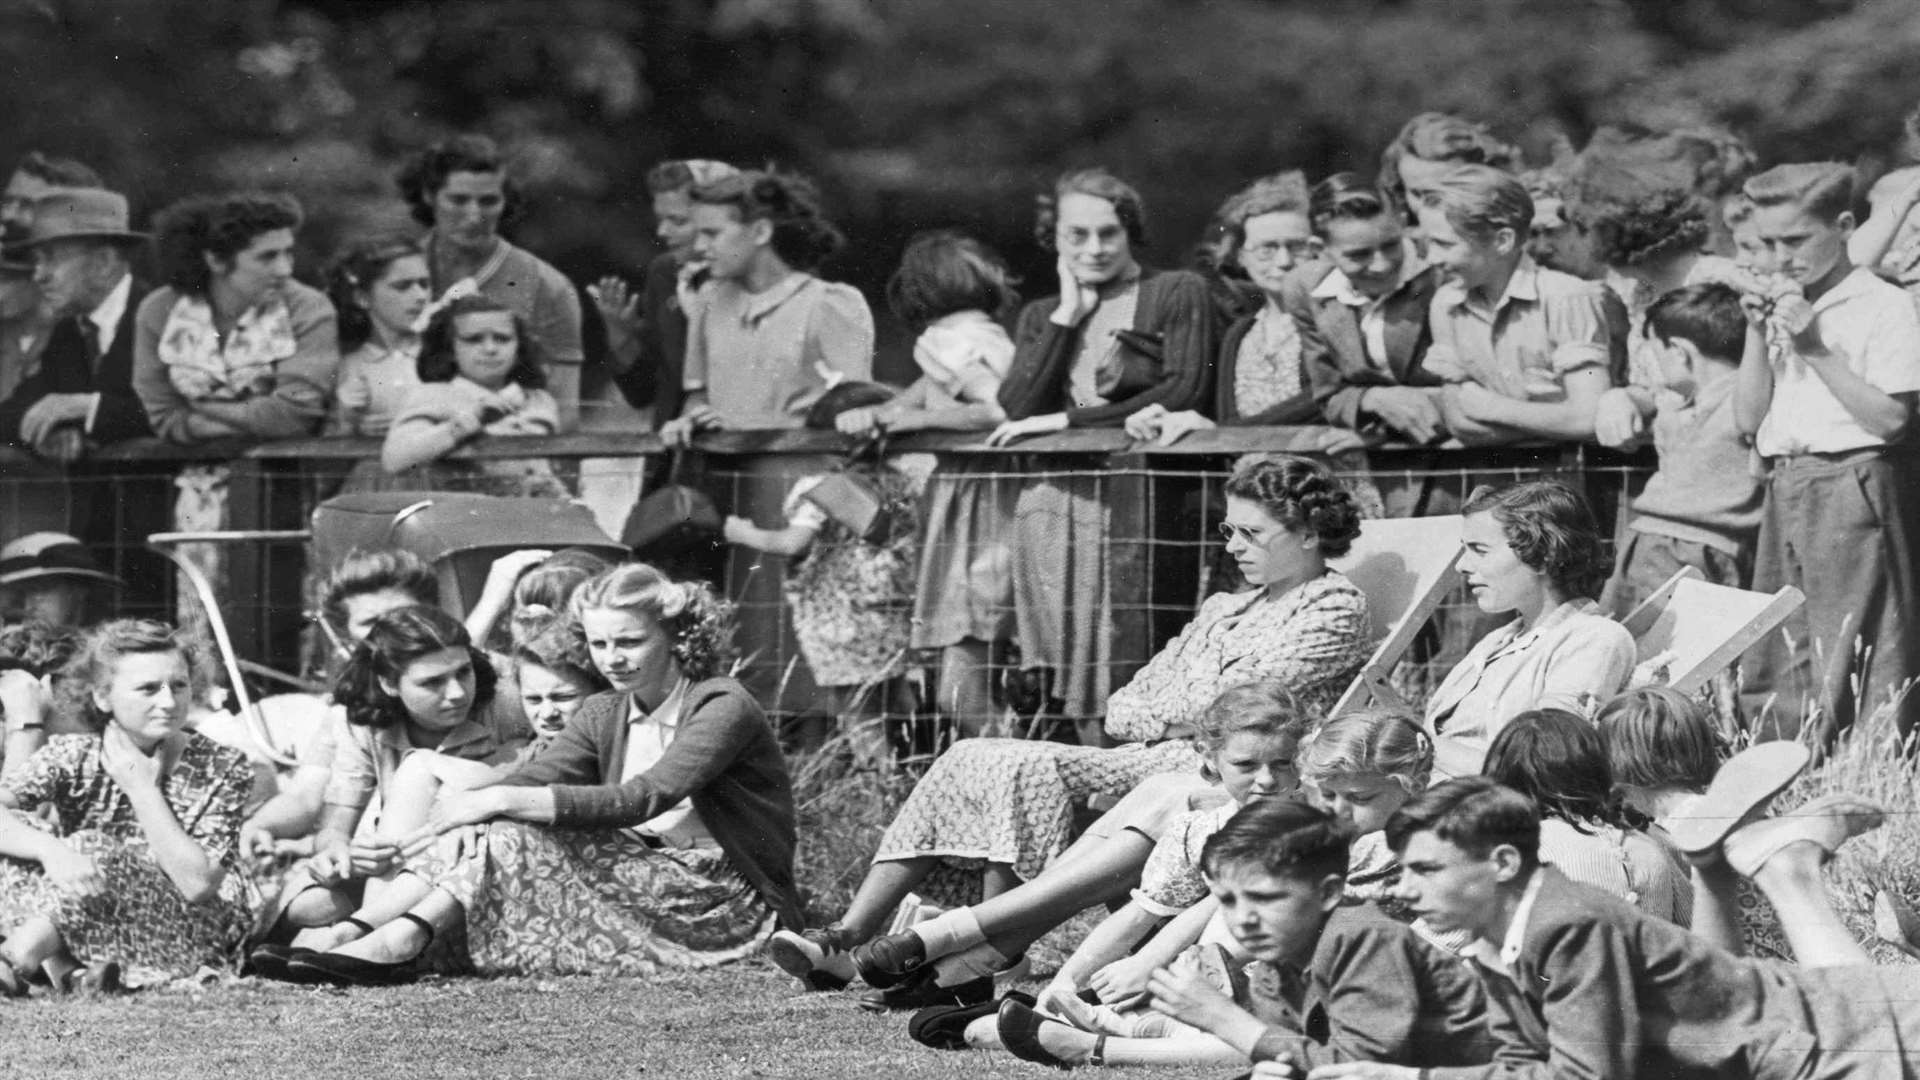 The Queen and Lady Brabourne relax in deck chairs watching cricket at Mersham-le-Hatch